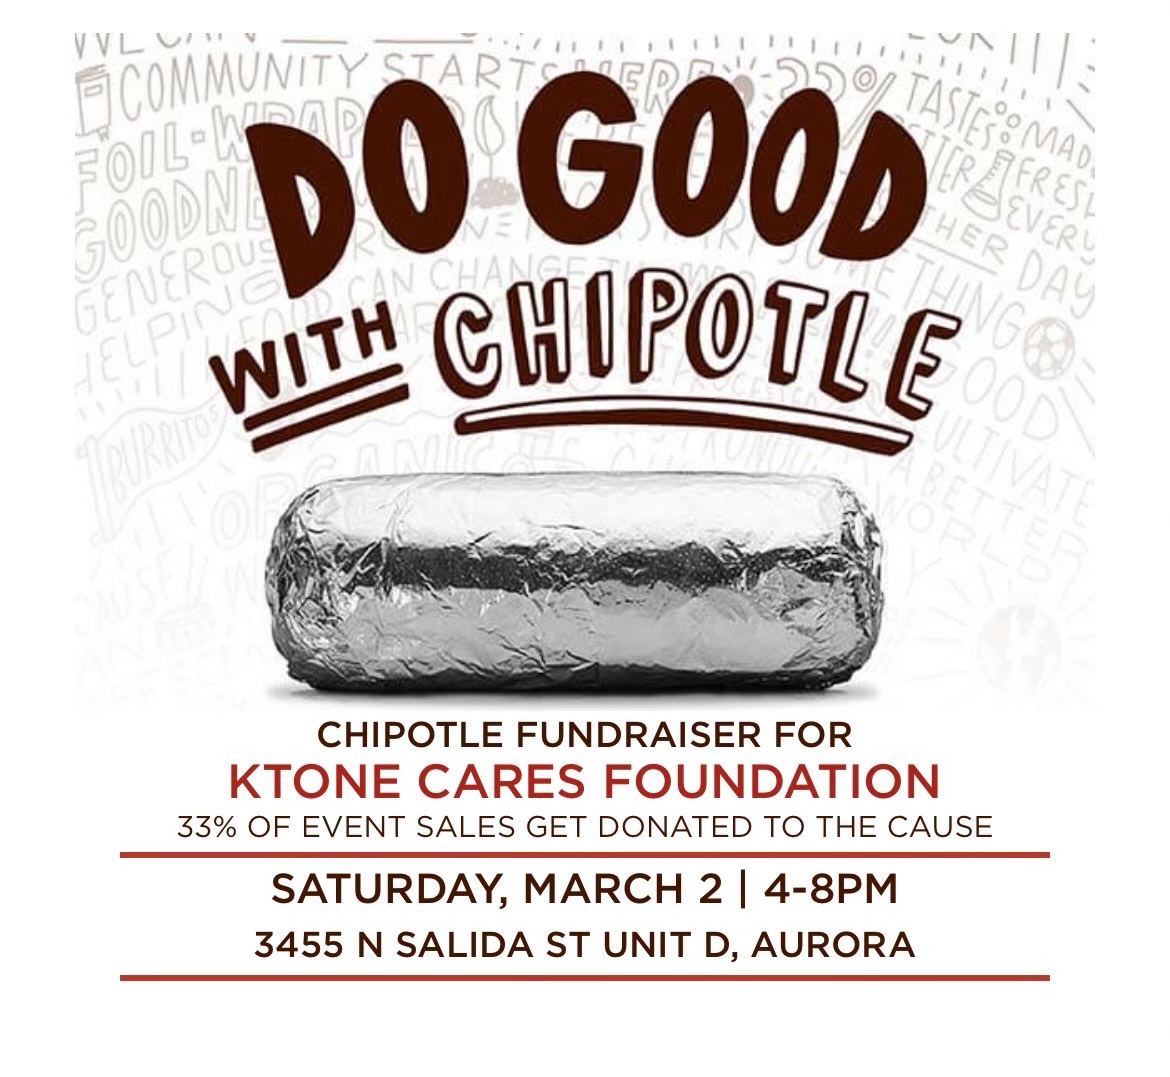 Chipotle Fundraiser for Ktone Cares Foundation